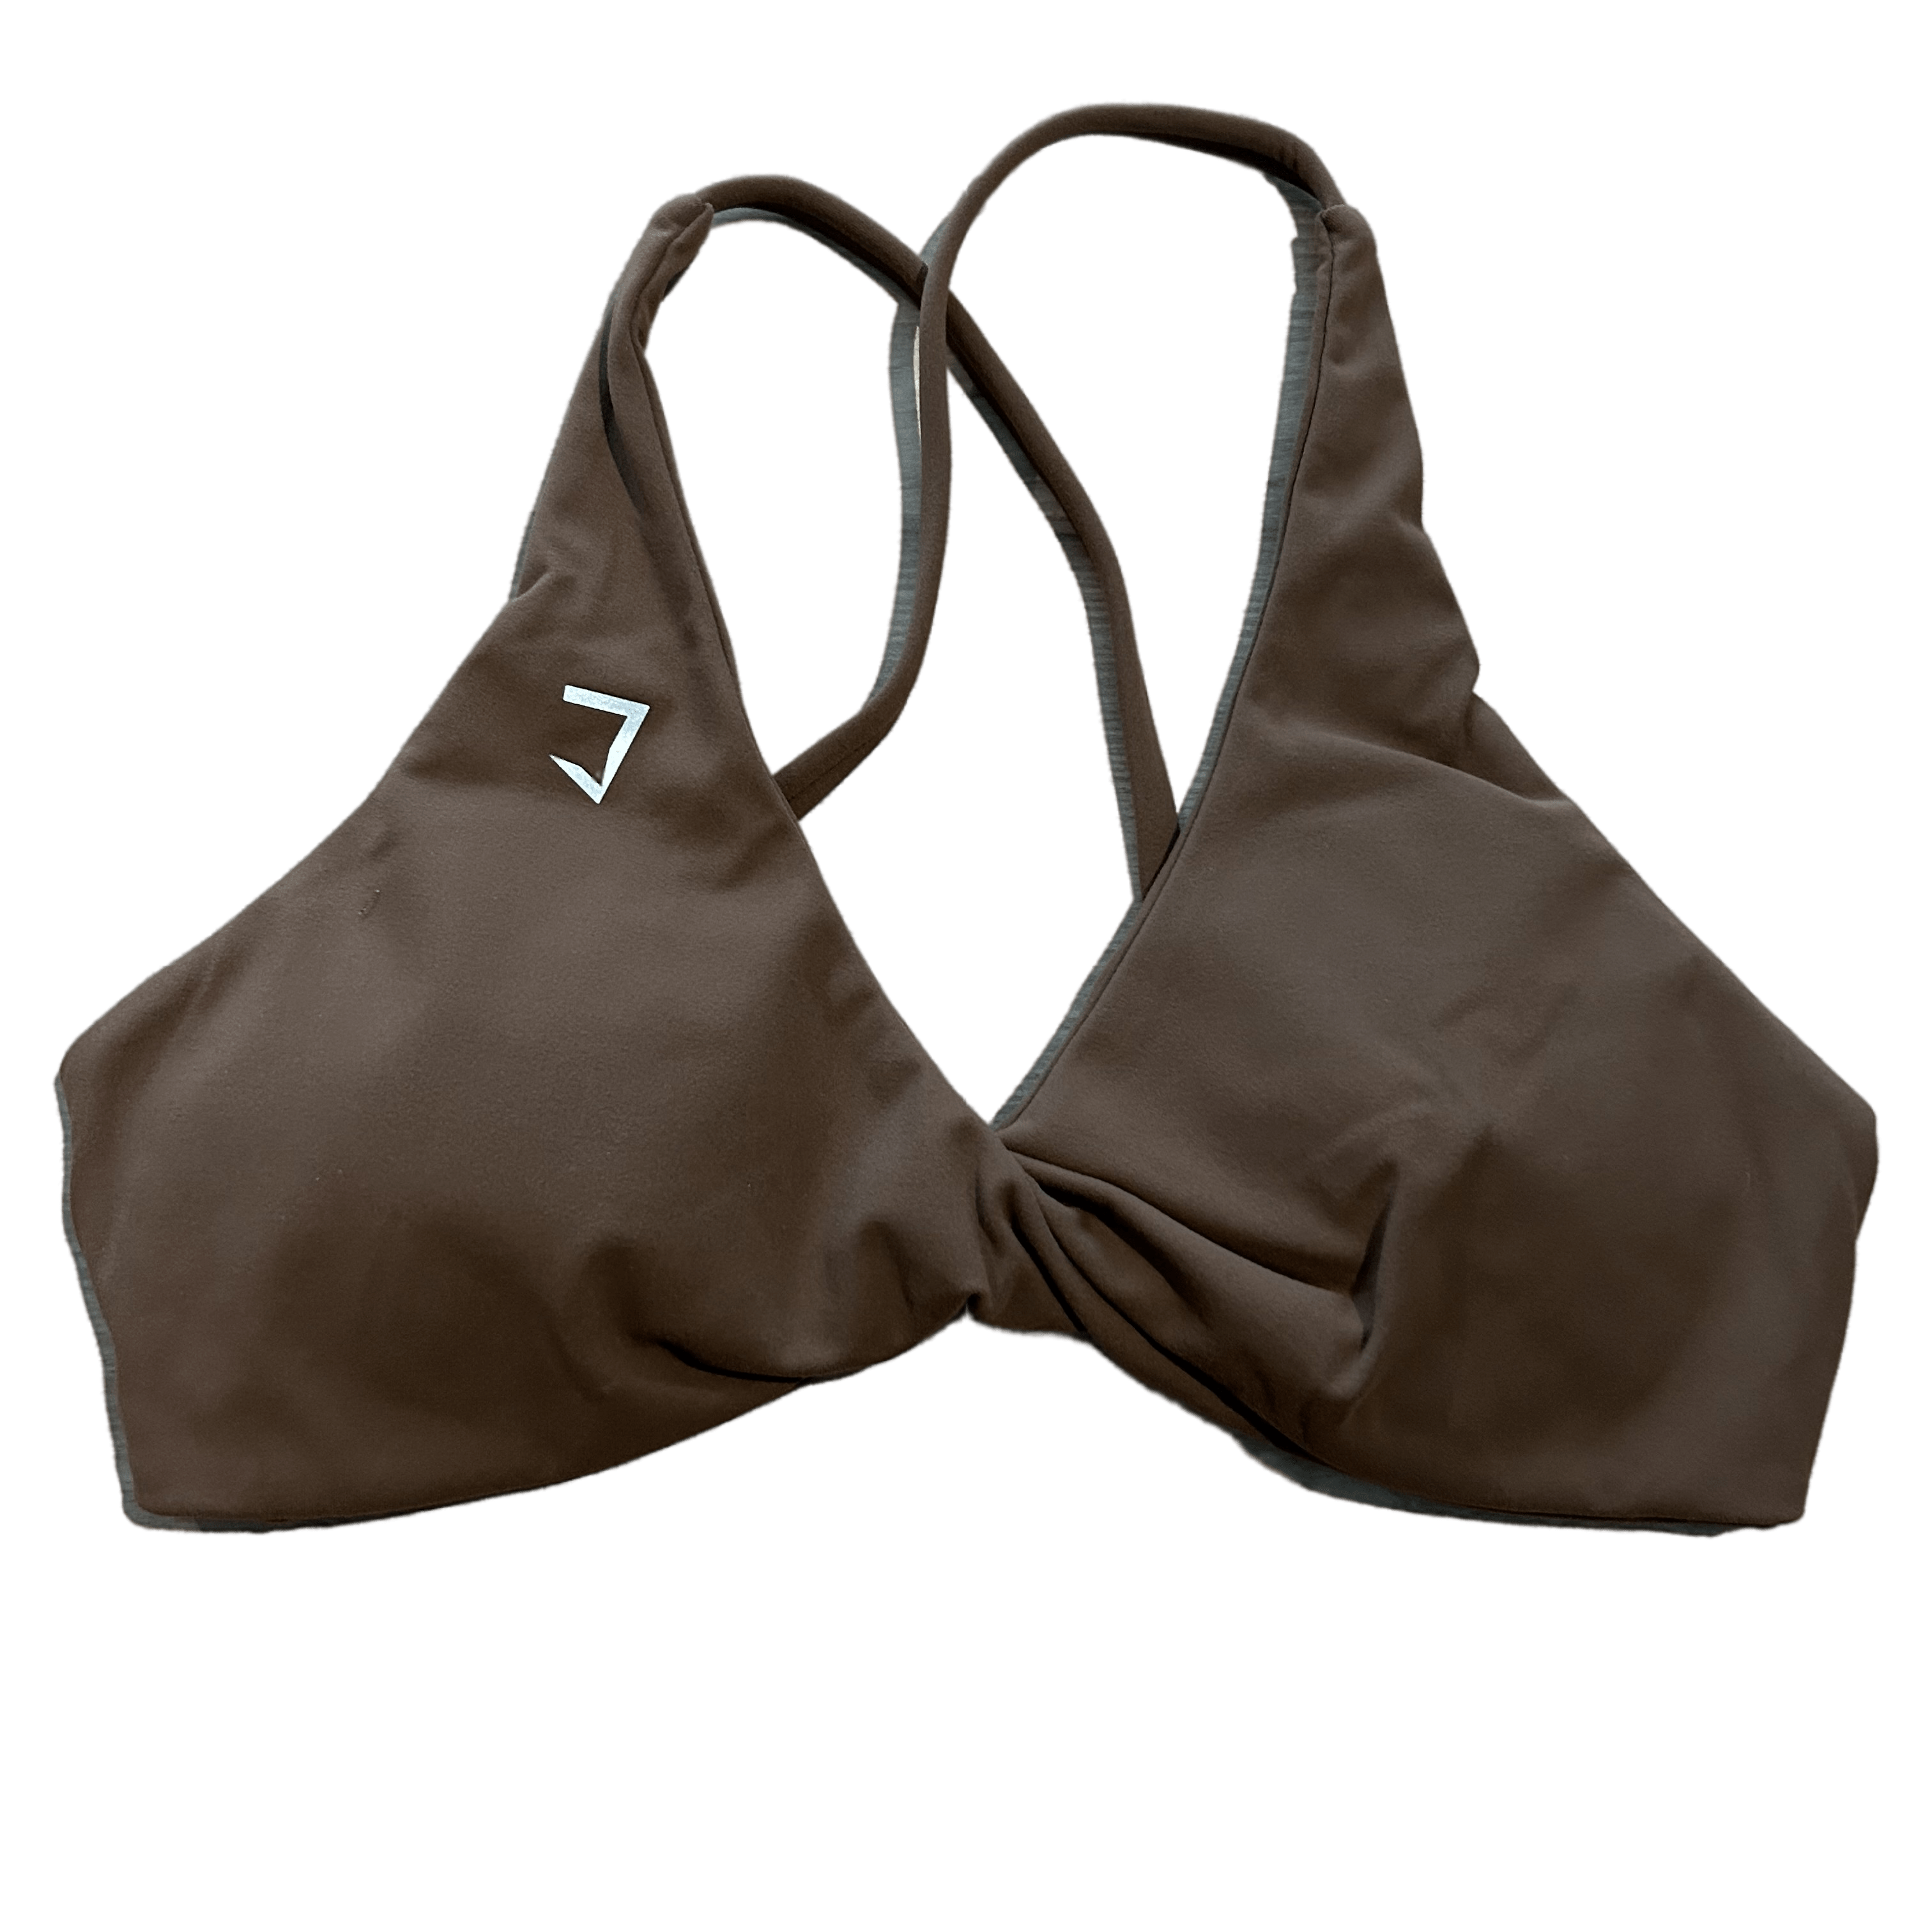 Everyday front twist backless bra push up padding (low impact)- size down for more support